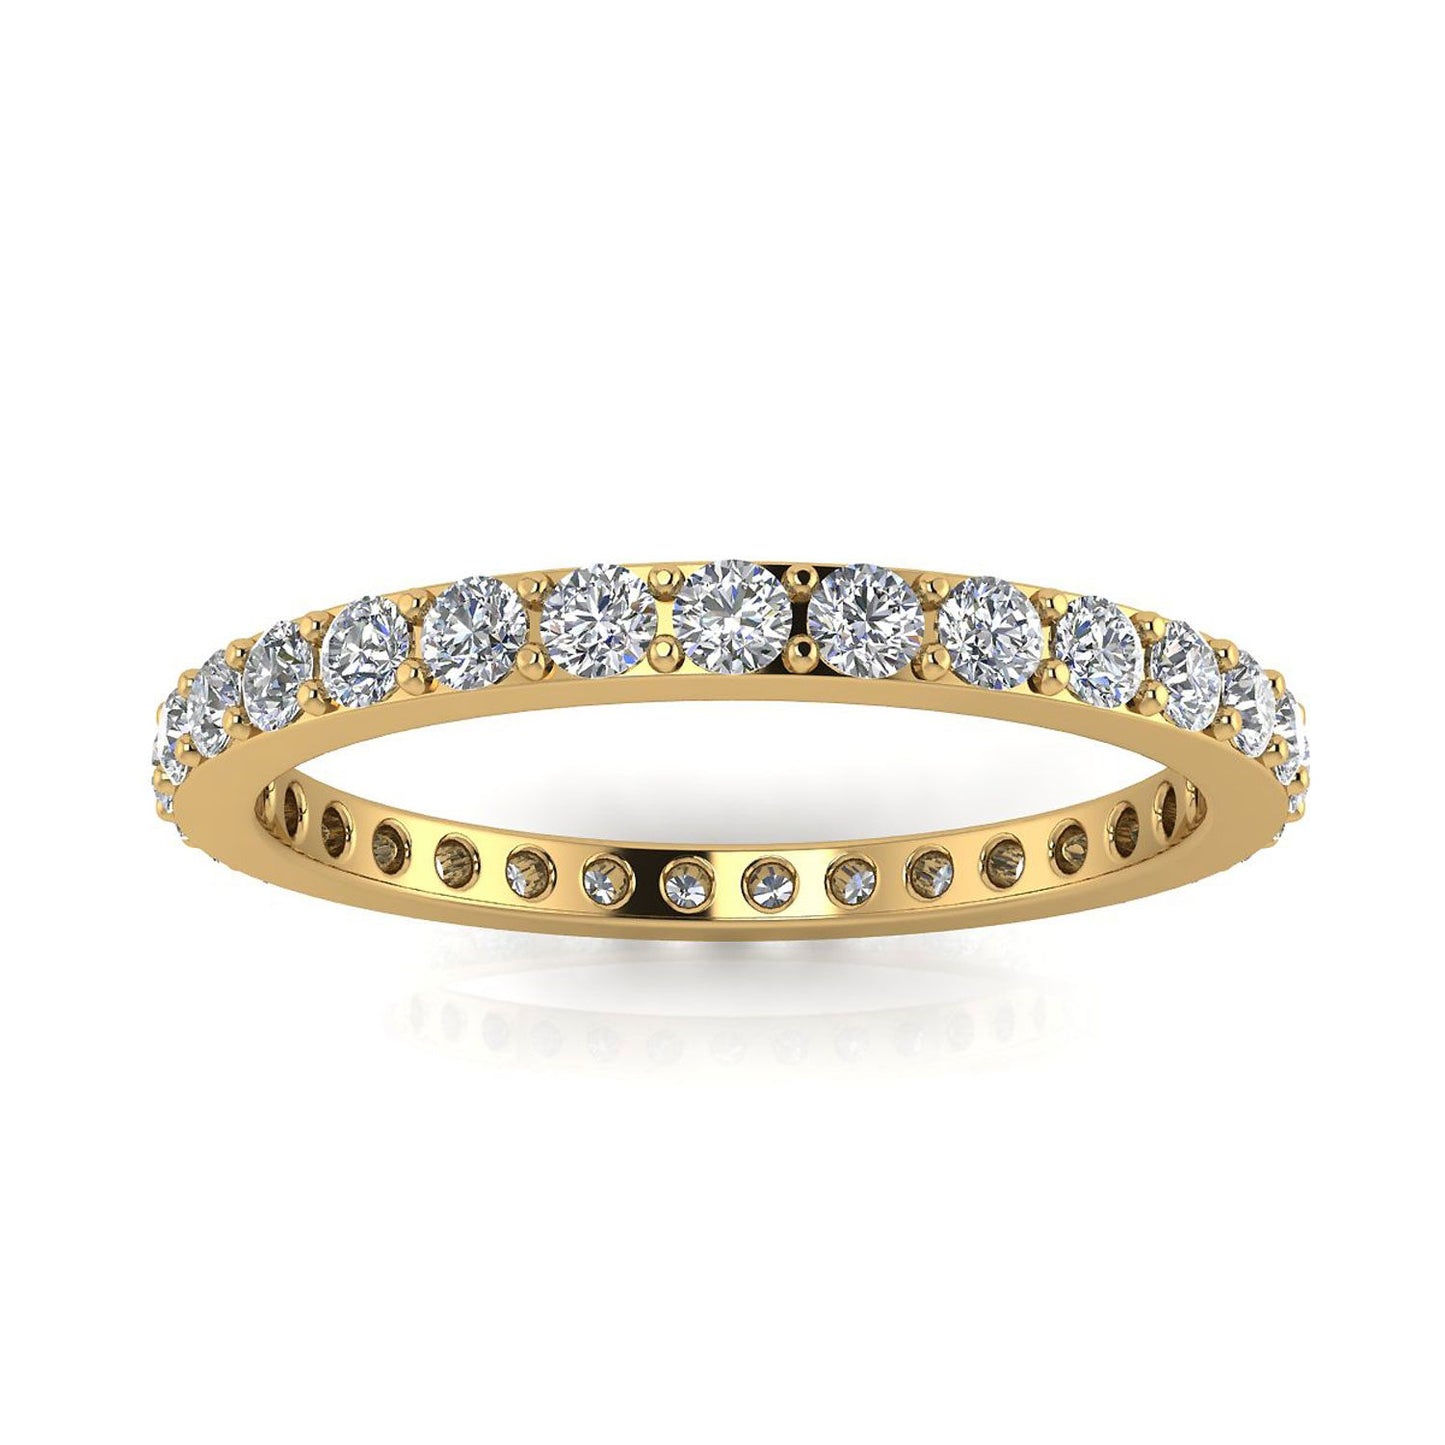 Round Brilliant Cut Diamond Pave Set Eternity Ring In 18k Yellow Gold  (0.46ct. Tw.) Ring Size 6